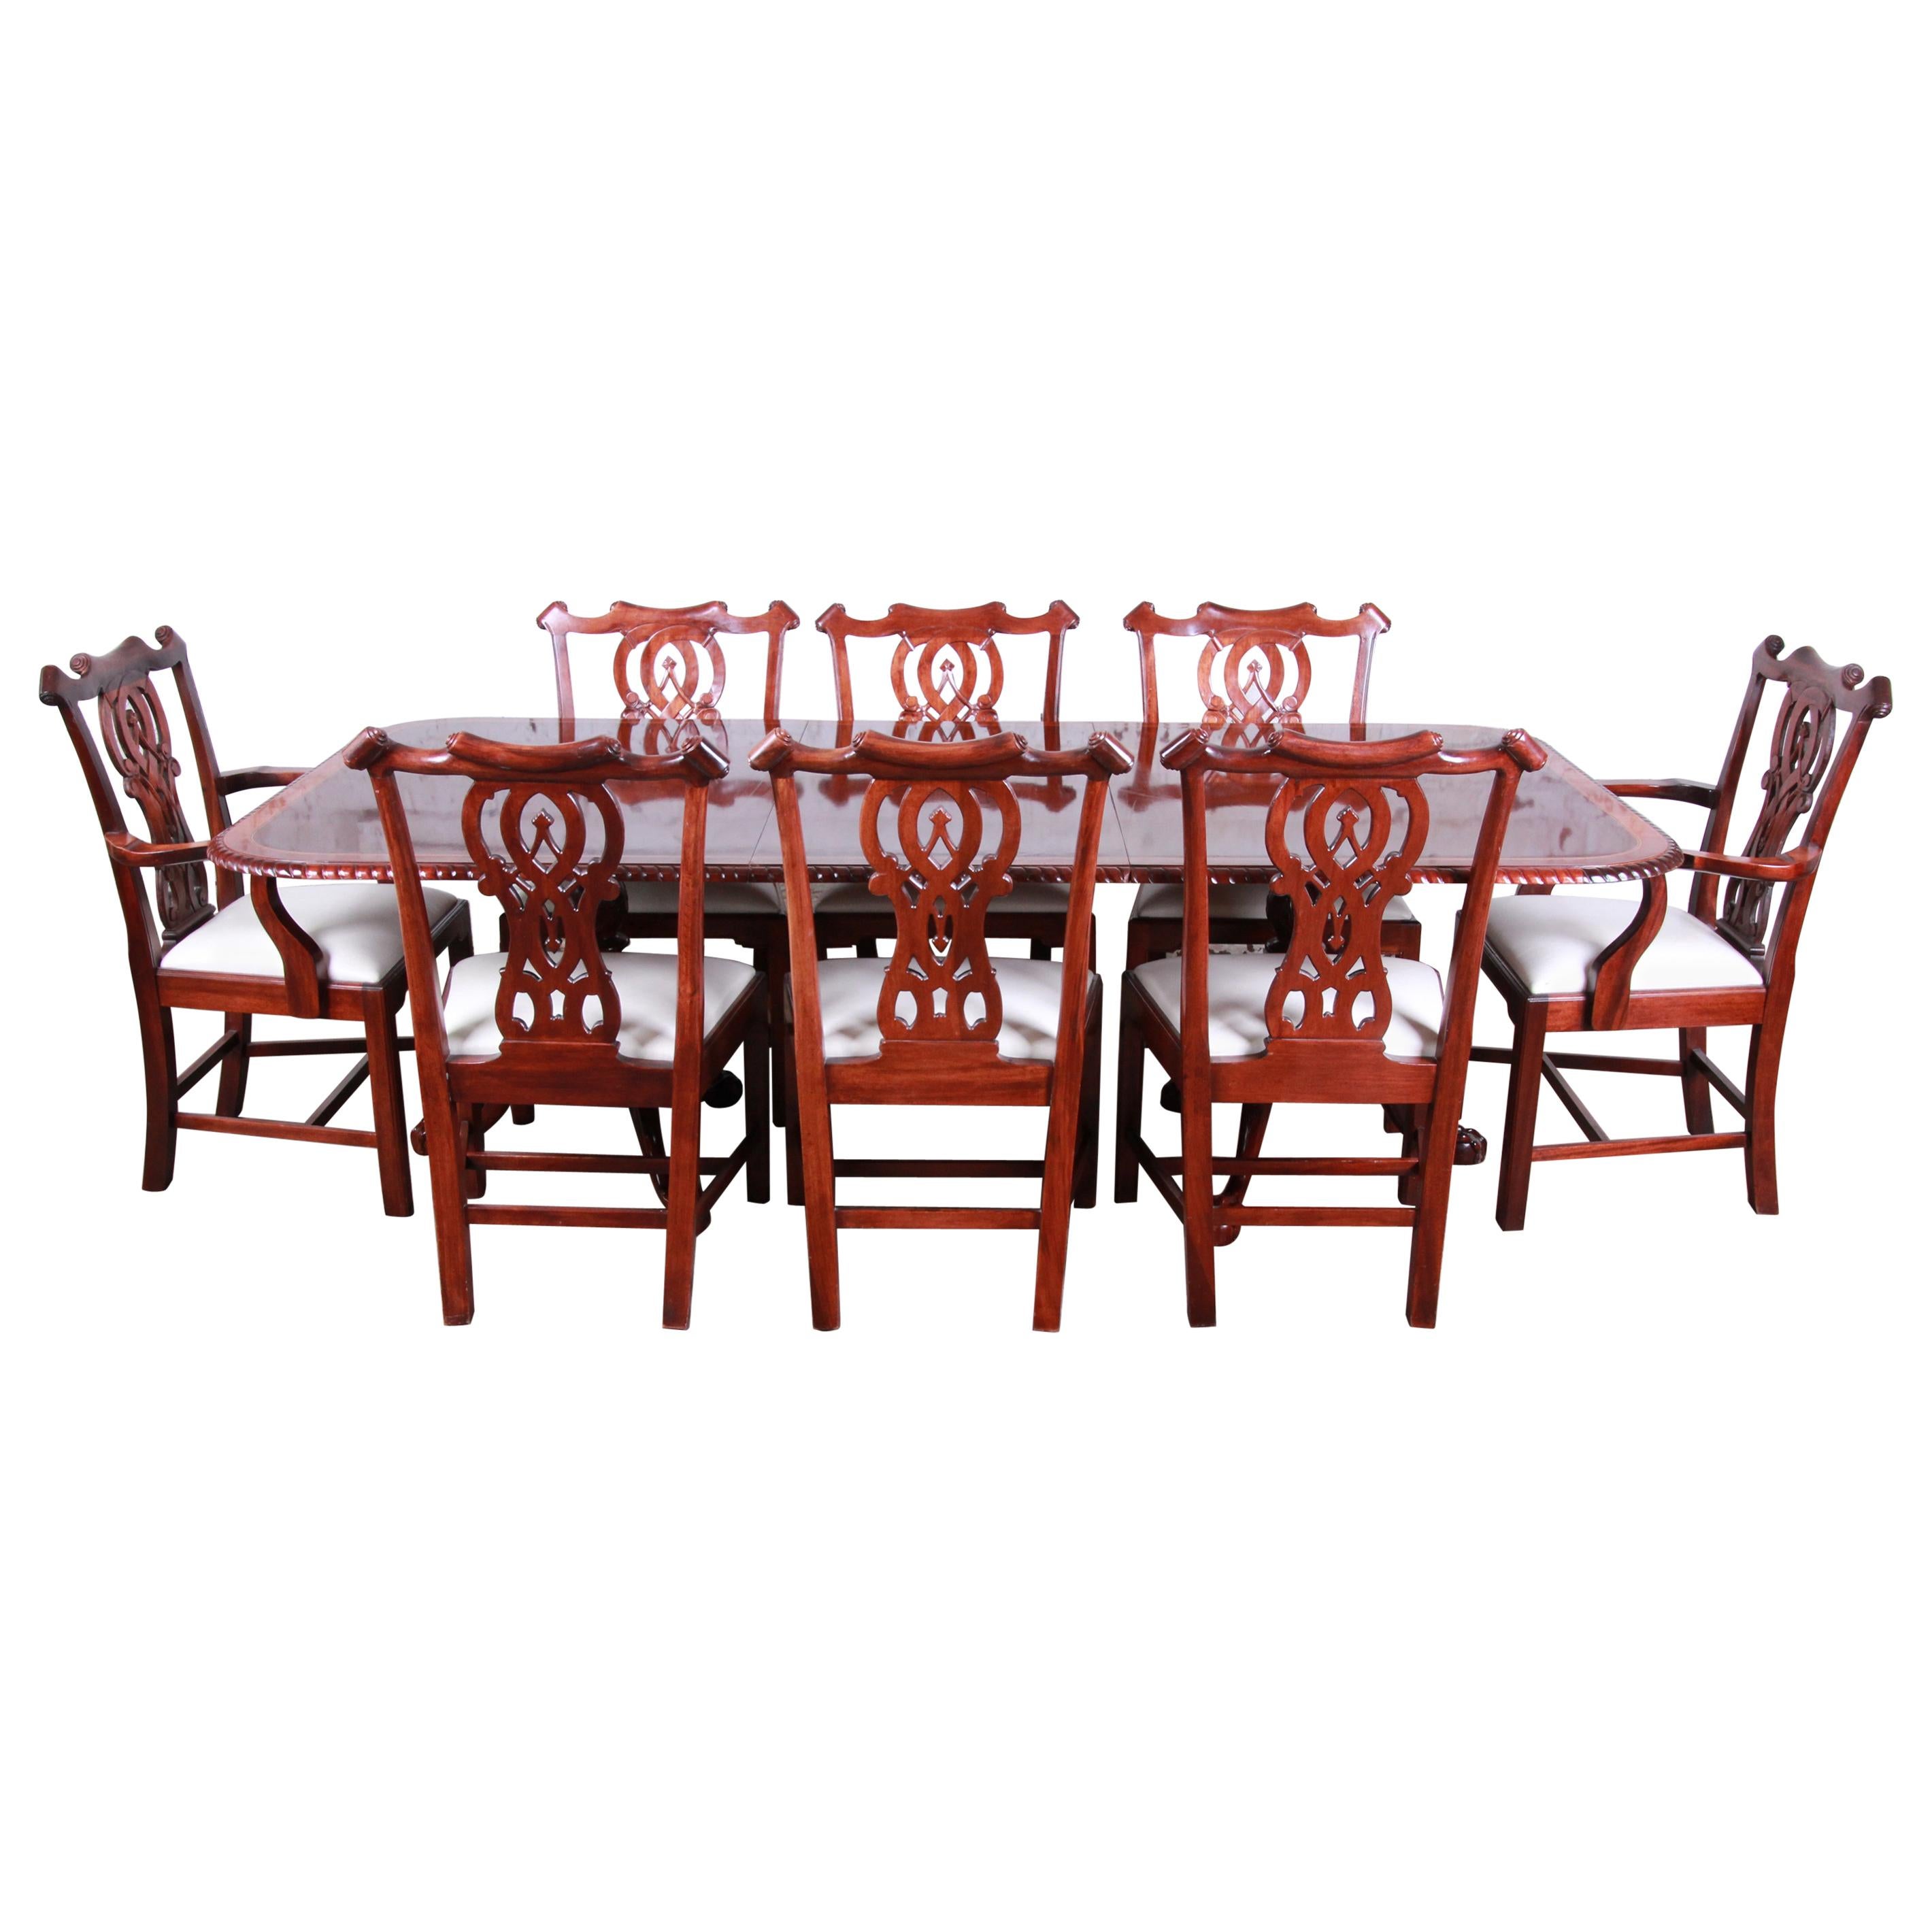 Chippendale Banded Mahogany Double Pedestal Dining Table with Eight Chairs